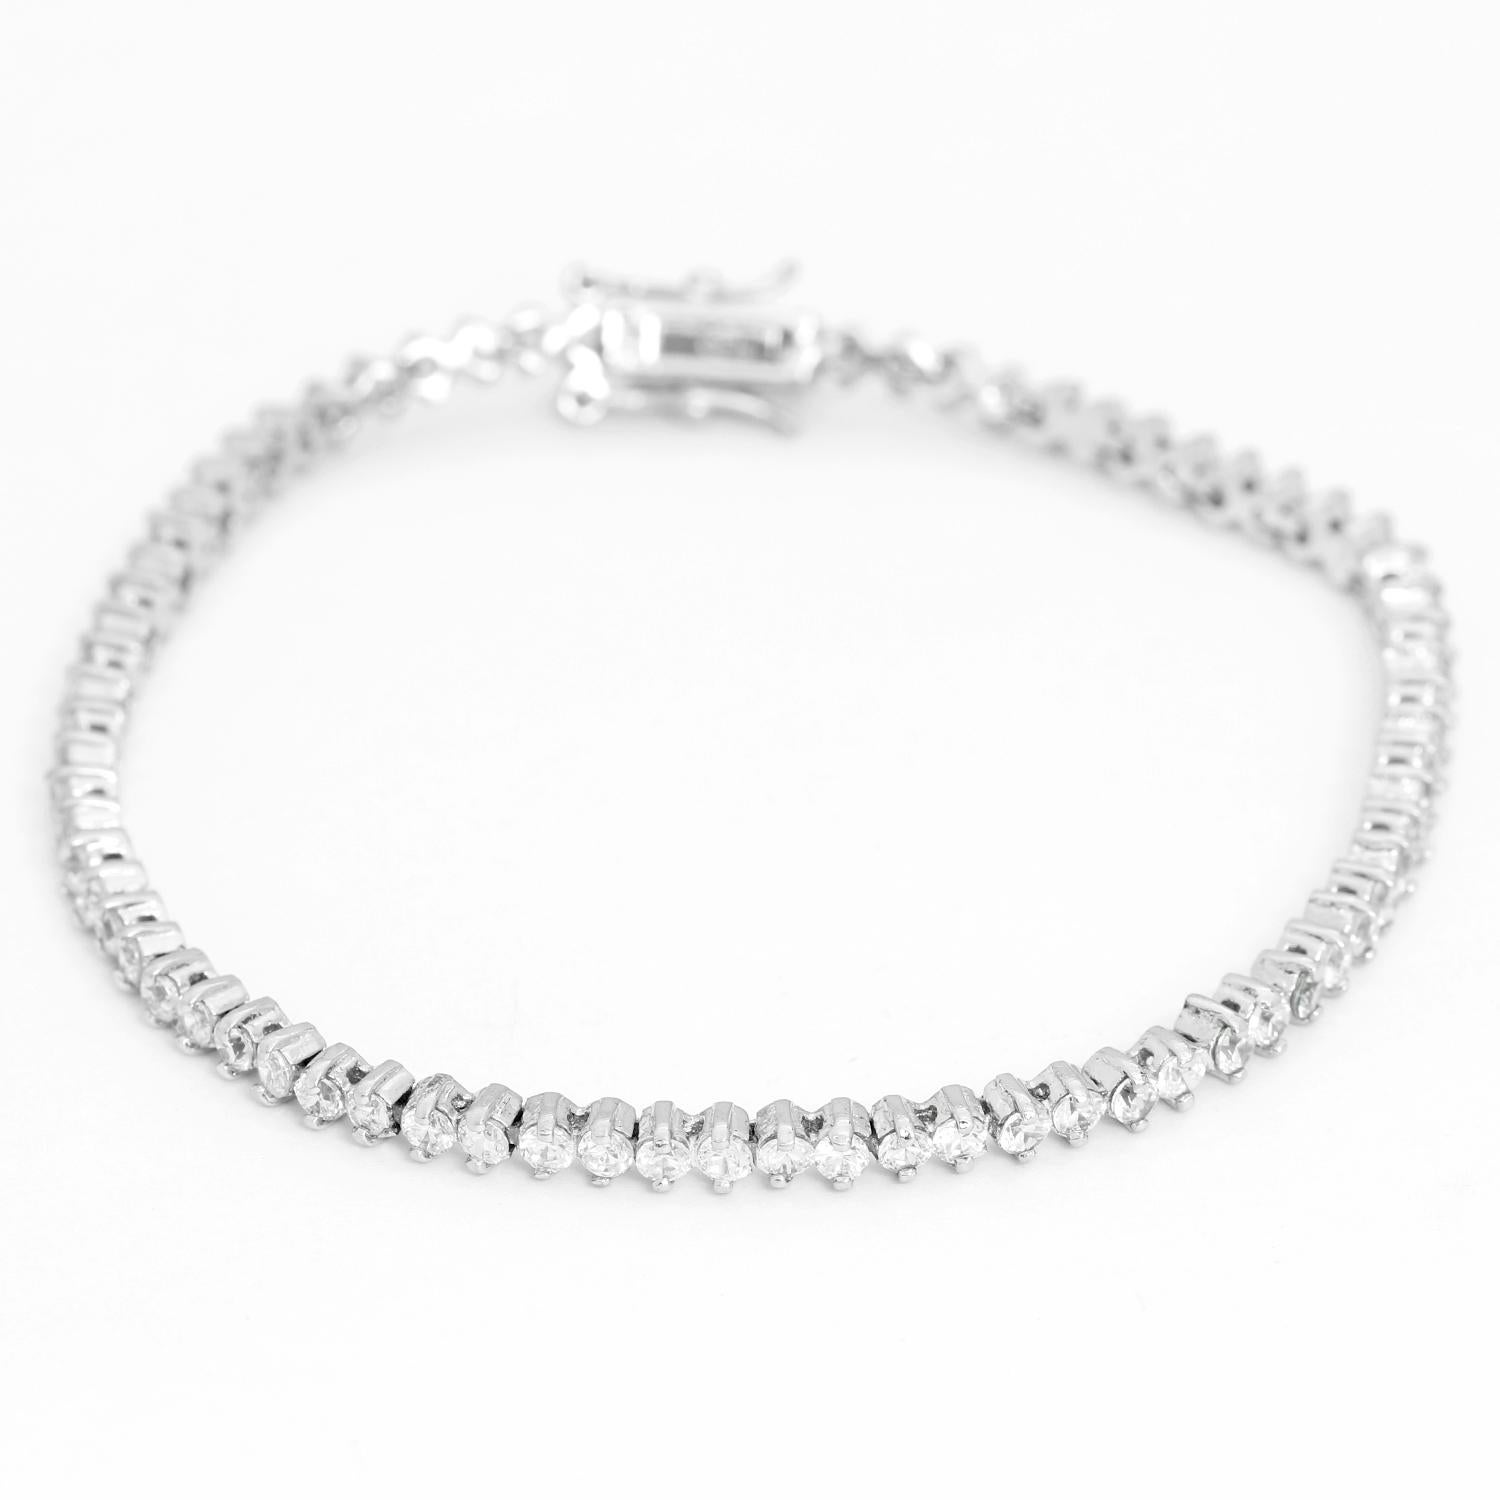 Platinum 2.28 ct. Diamond Tennis Bracelet Size 7  - This stunning tennis bracelet features 2.28 carats of SI2-SI3 clarity and HI-color diamonds set in platinum. Bracelet measures apx. 7 inches in length. Total weight is 7.9 grams.